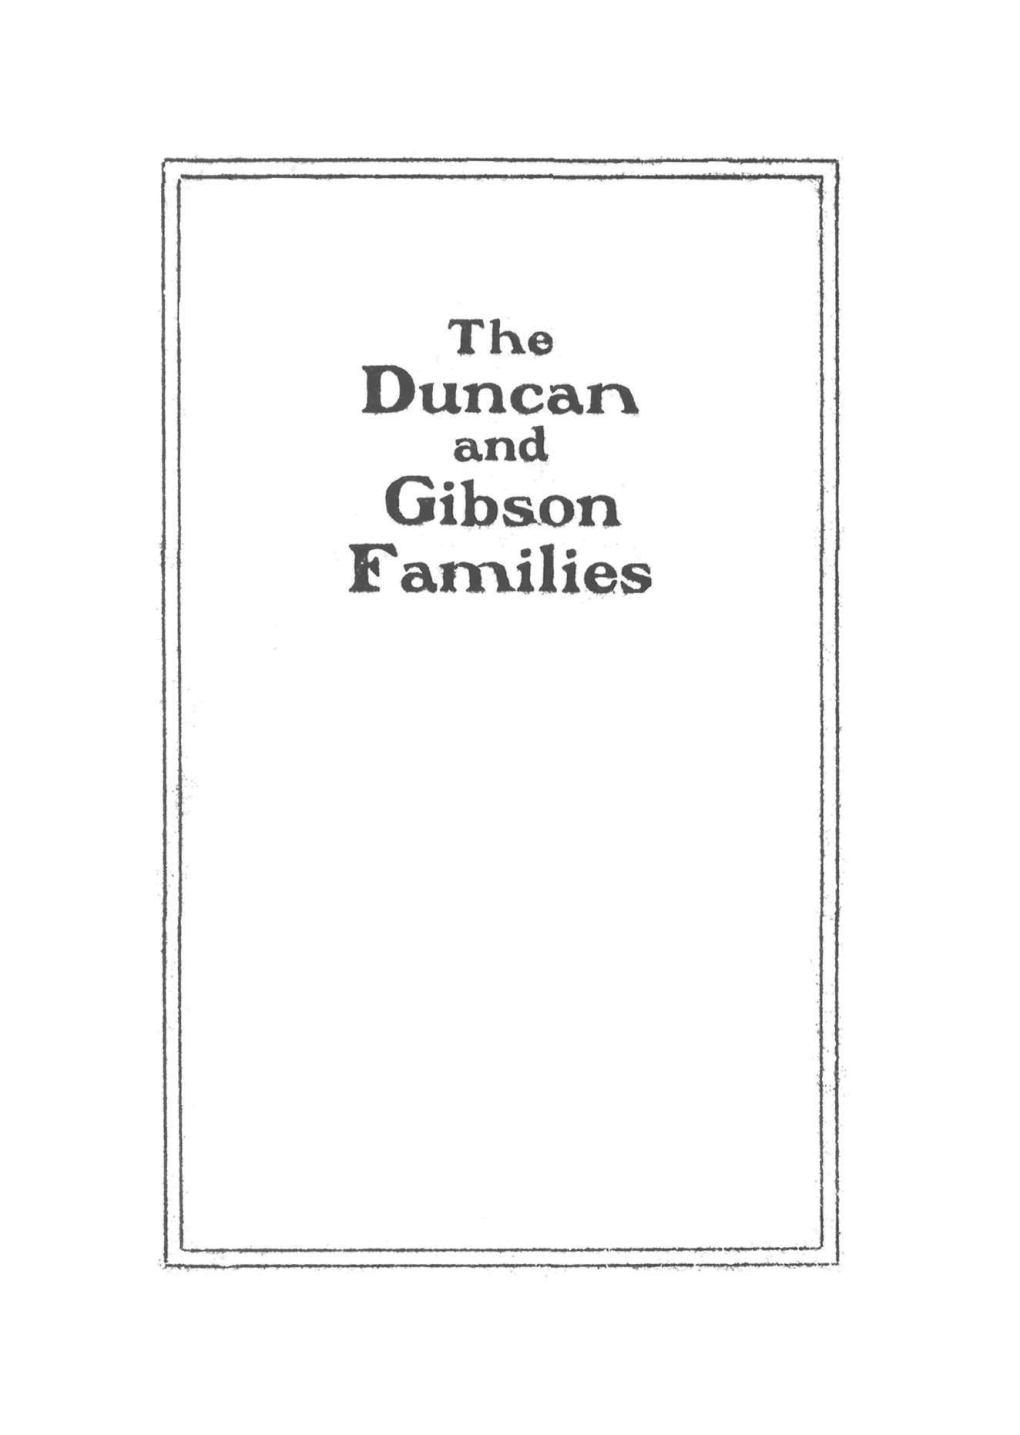 Duncan and Gibson Families the DUNCAN and GIBSON FAMILIES H